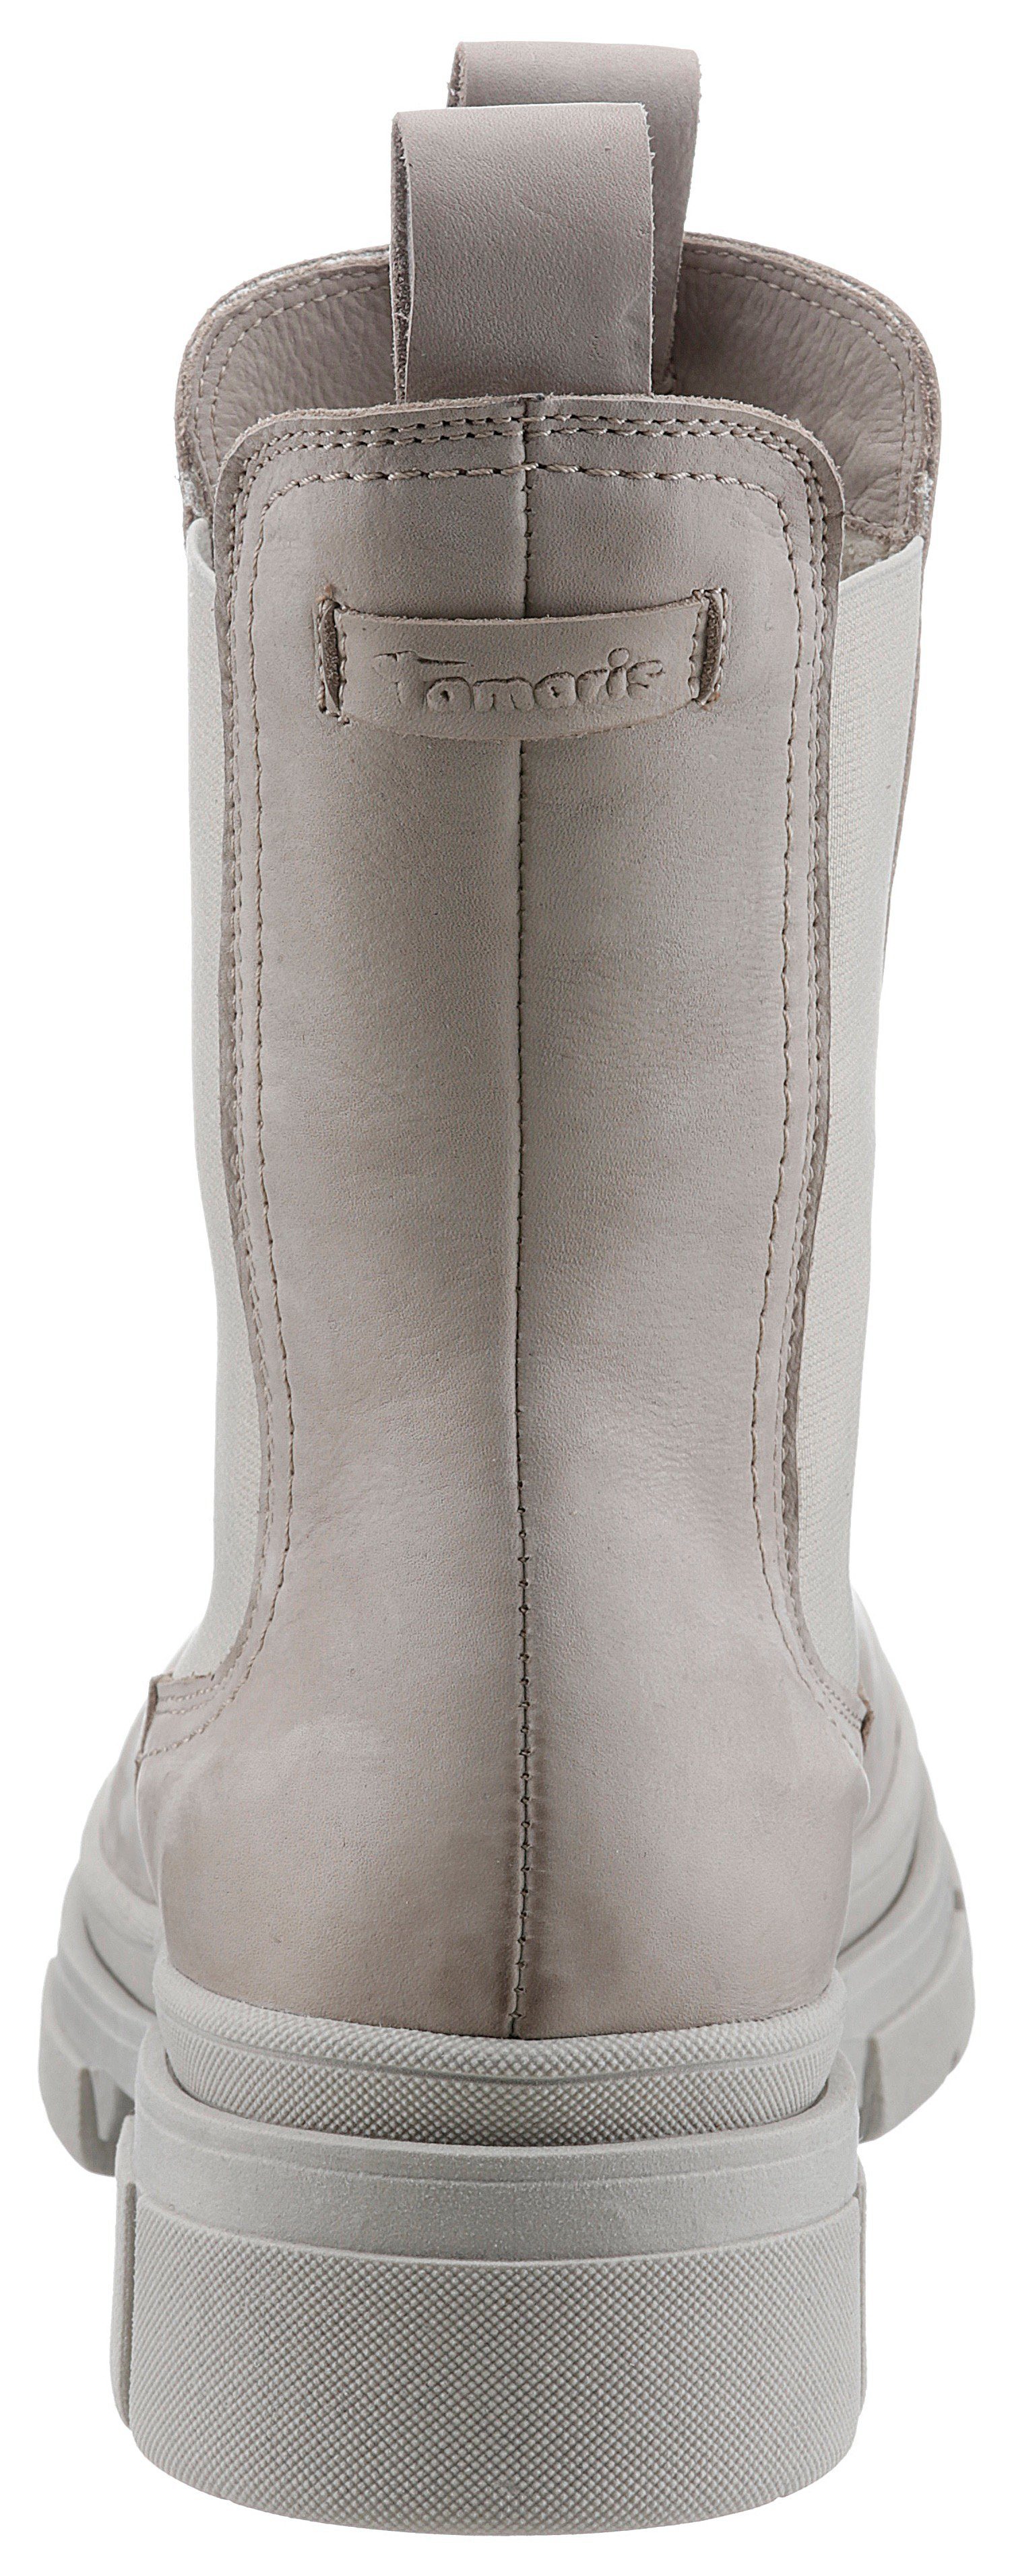 Tamaris taupe in Chelseaboots Form bequemer